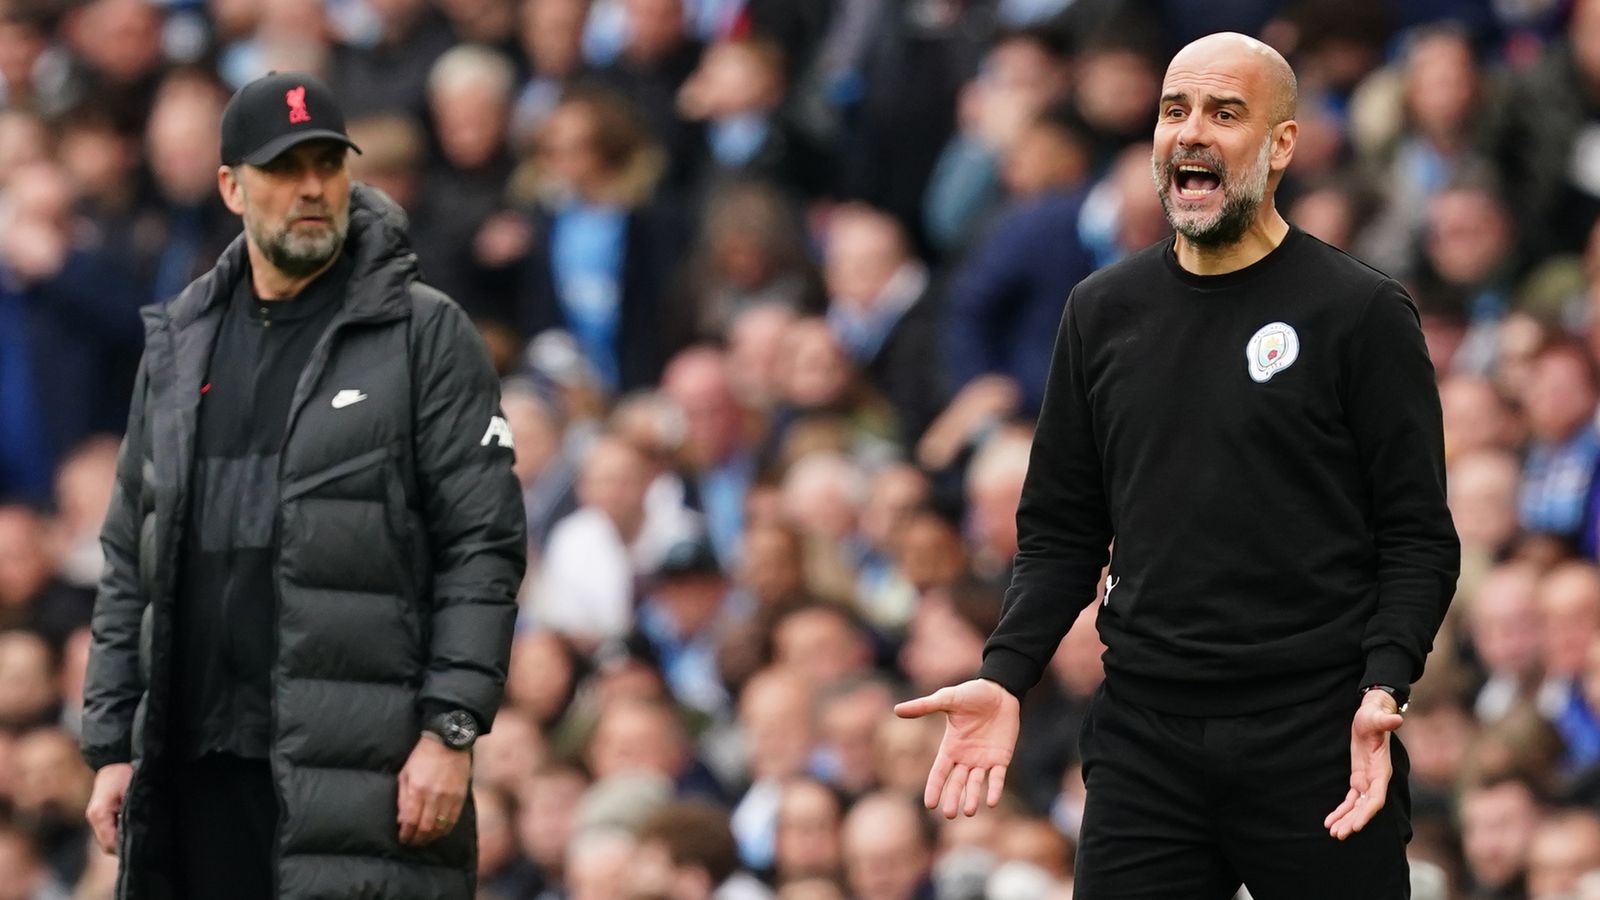 Pep Guardiola apologises to Liverpool after Man City chants but adamant rivalry has not grown toxic